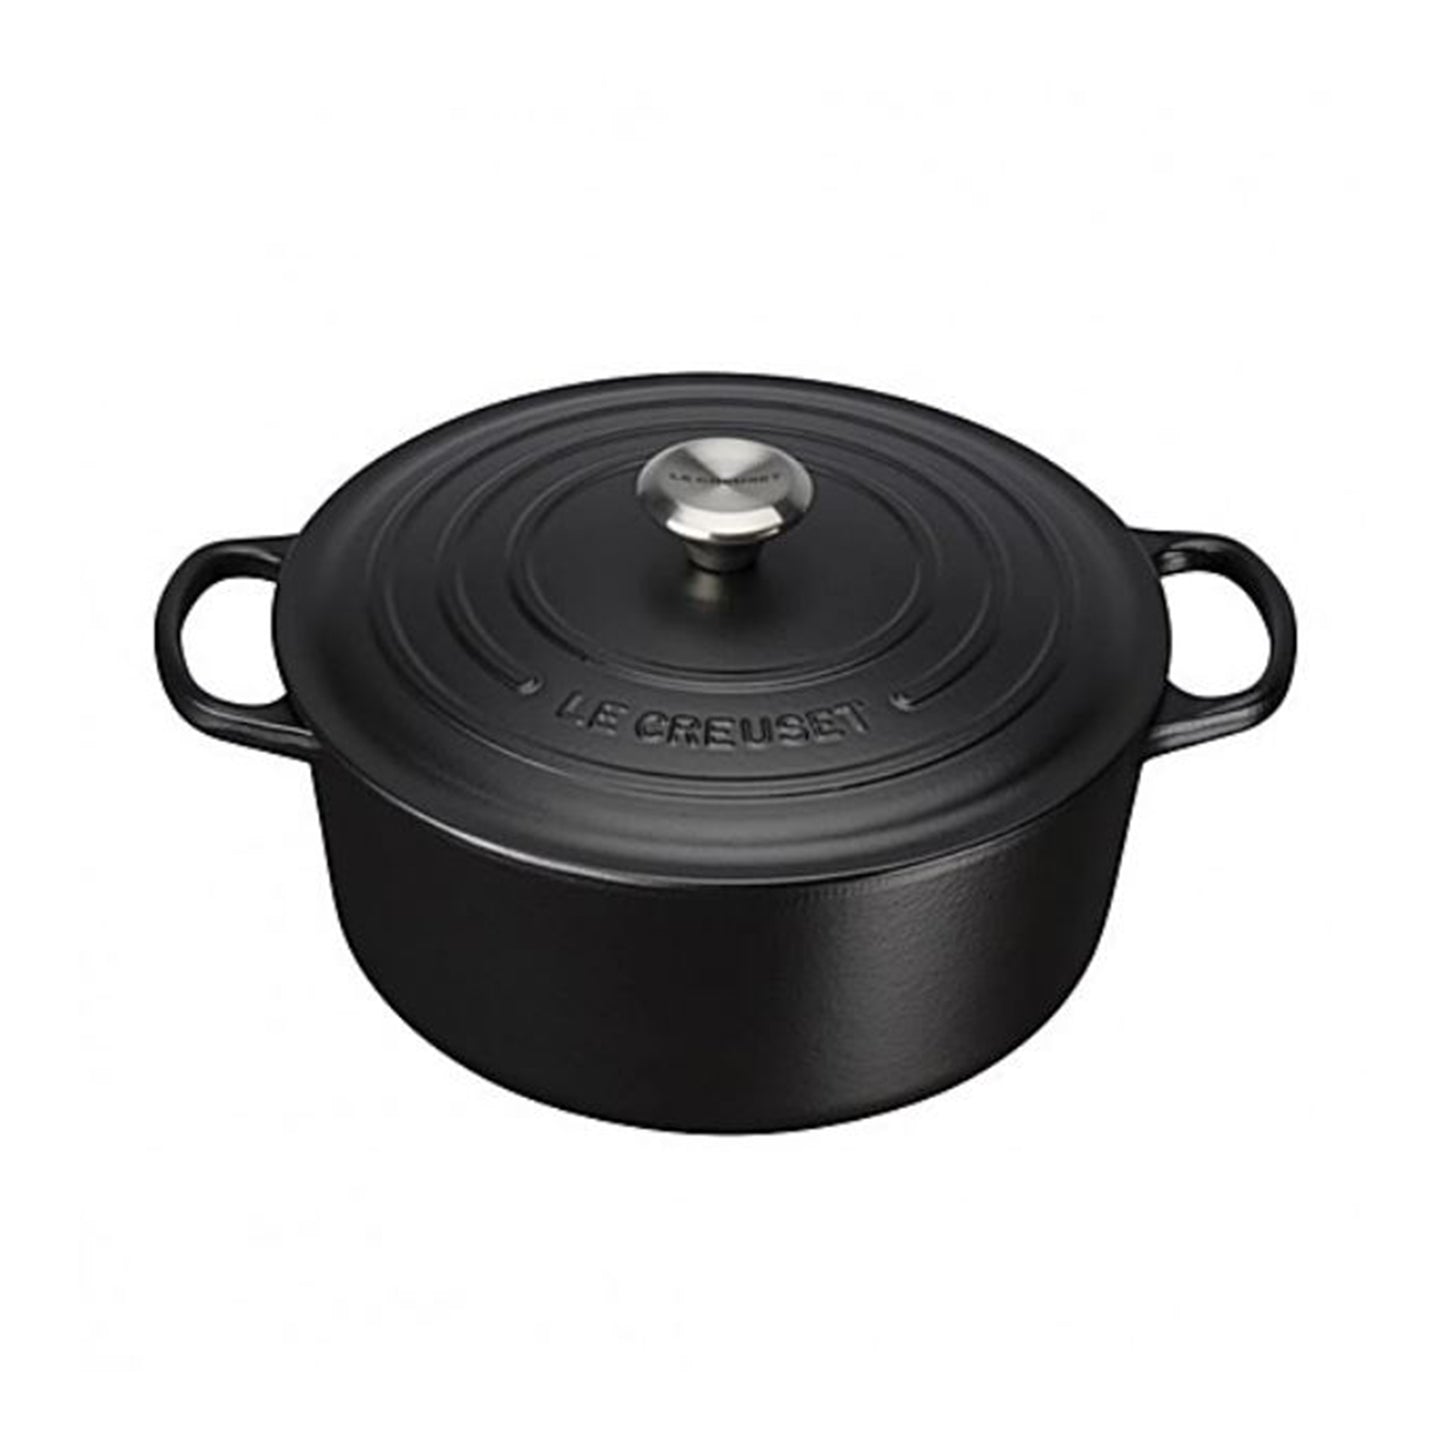 a black cast iron pot with lid and stainless steel knob 